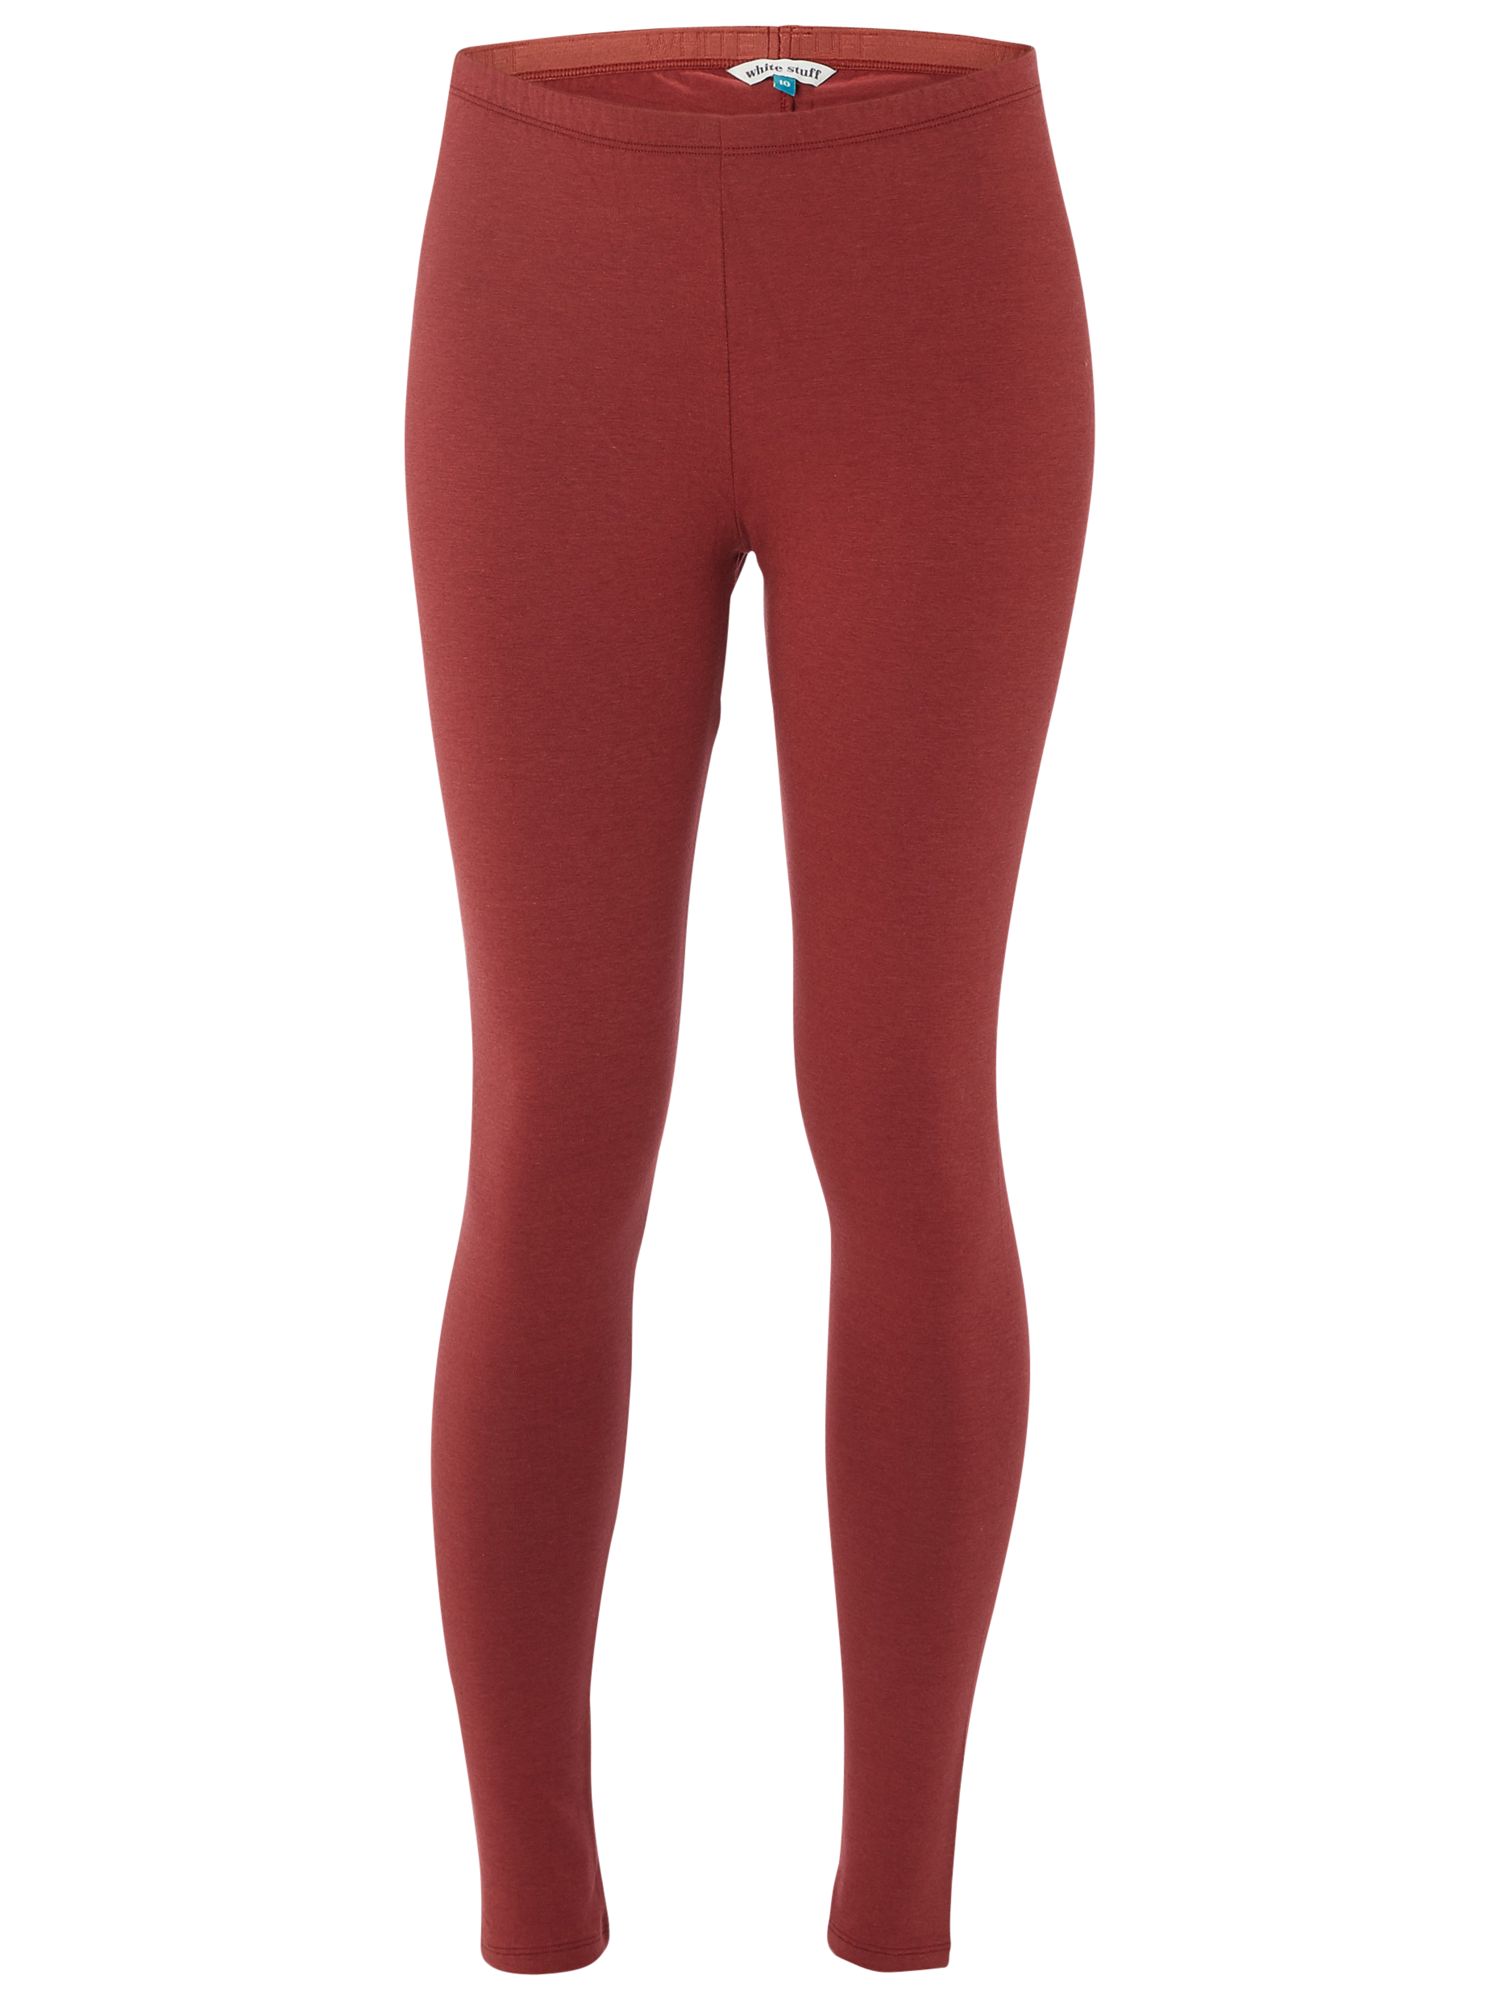 White Stuff Jumping Lil Leggings, Clay Red